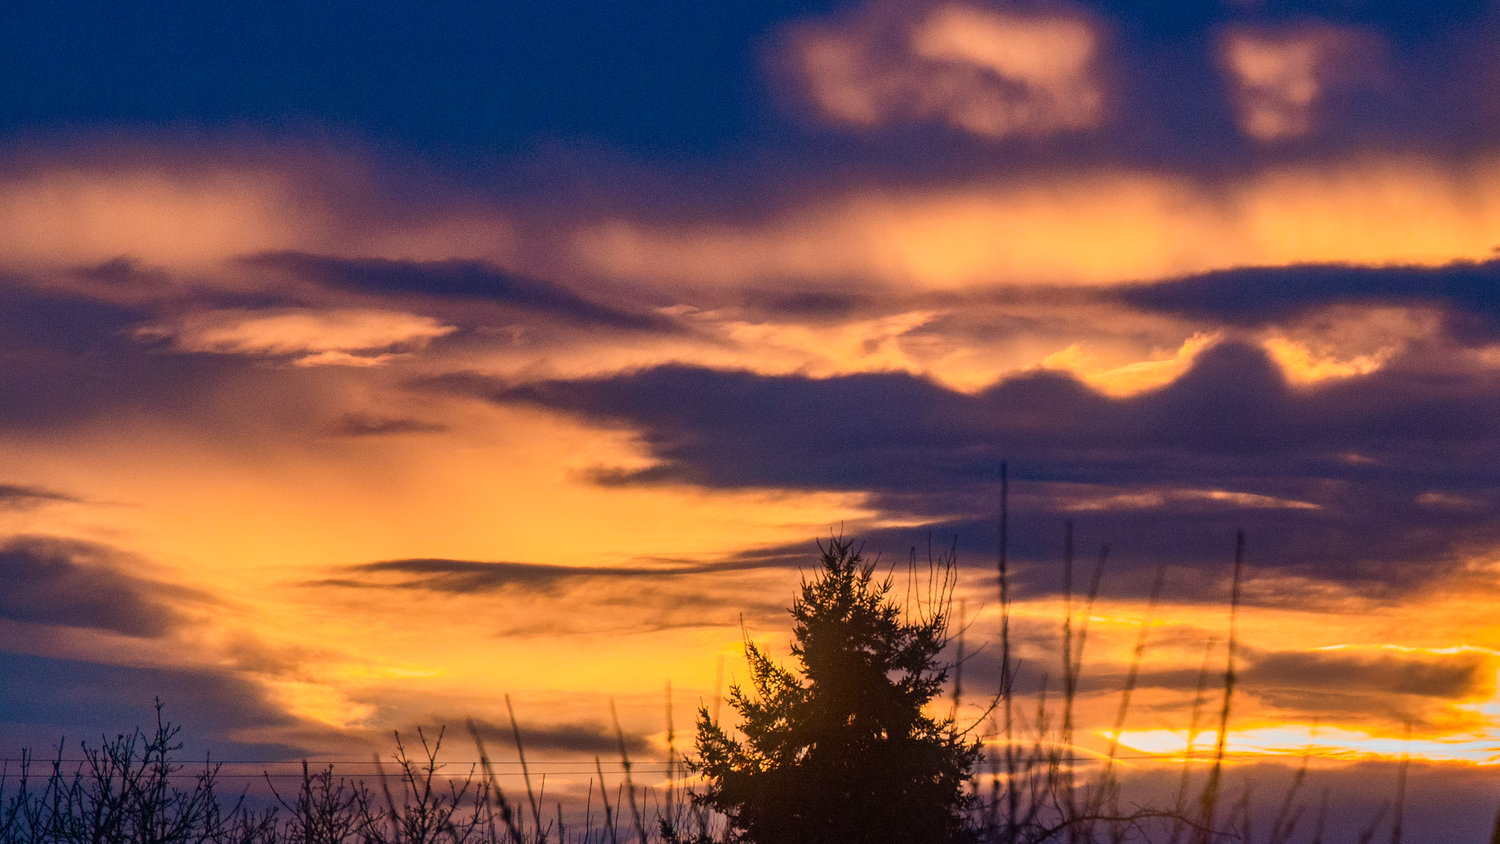 The Saturday sunset was a picturesque one. This photo was captured from Chehalis.